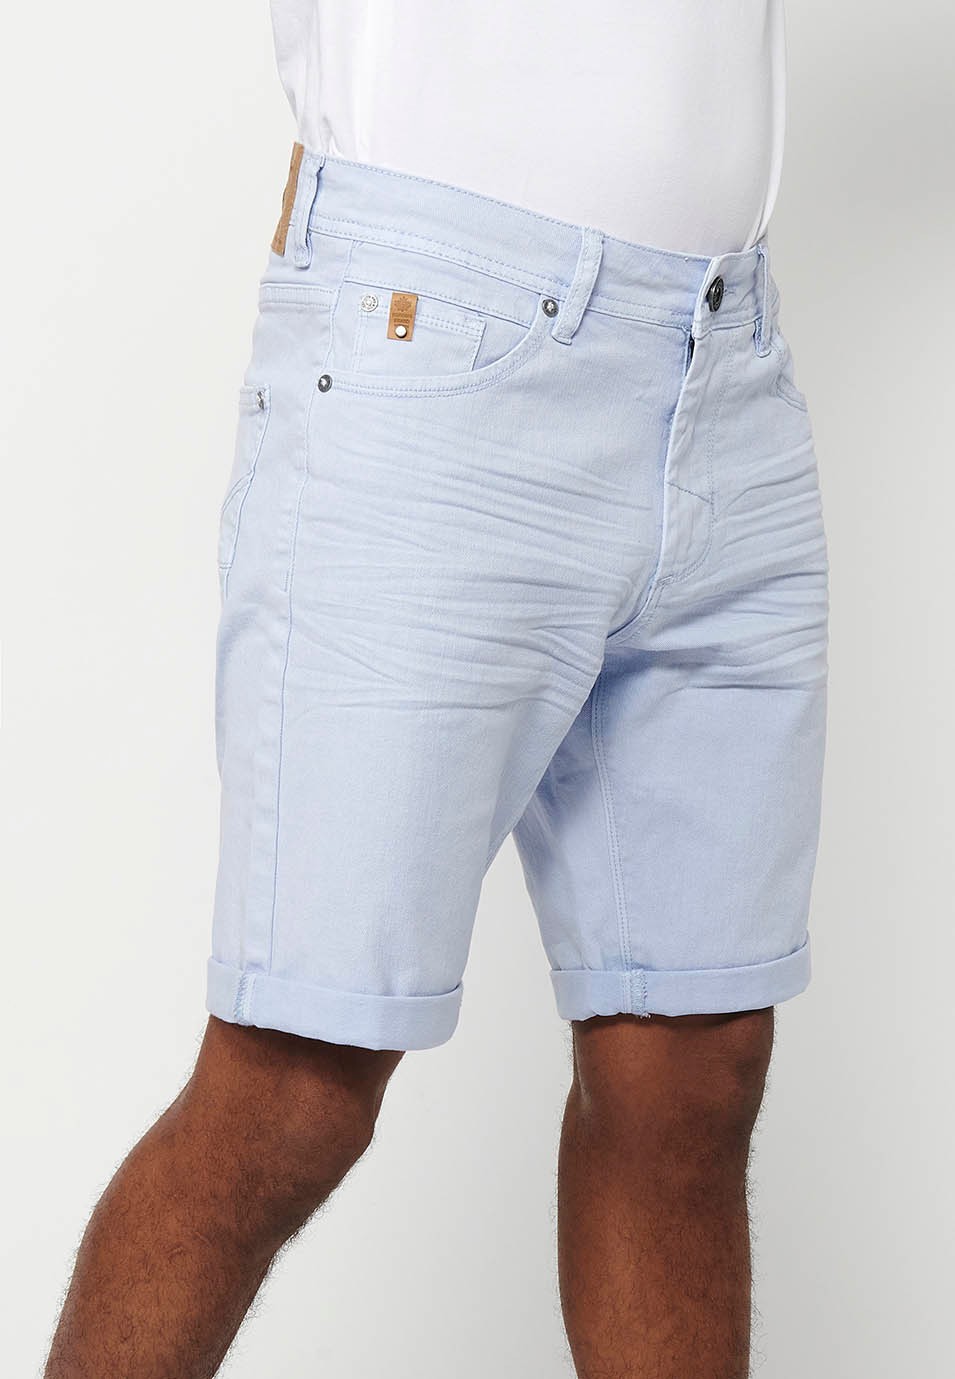 Denim Bermuda shorts with cuffed finish and front zipper and button closure. Five pockets, one blue color pocket for men 3